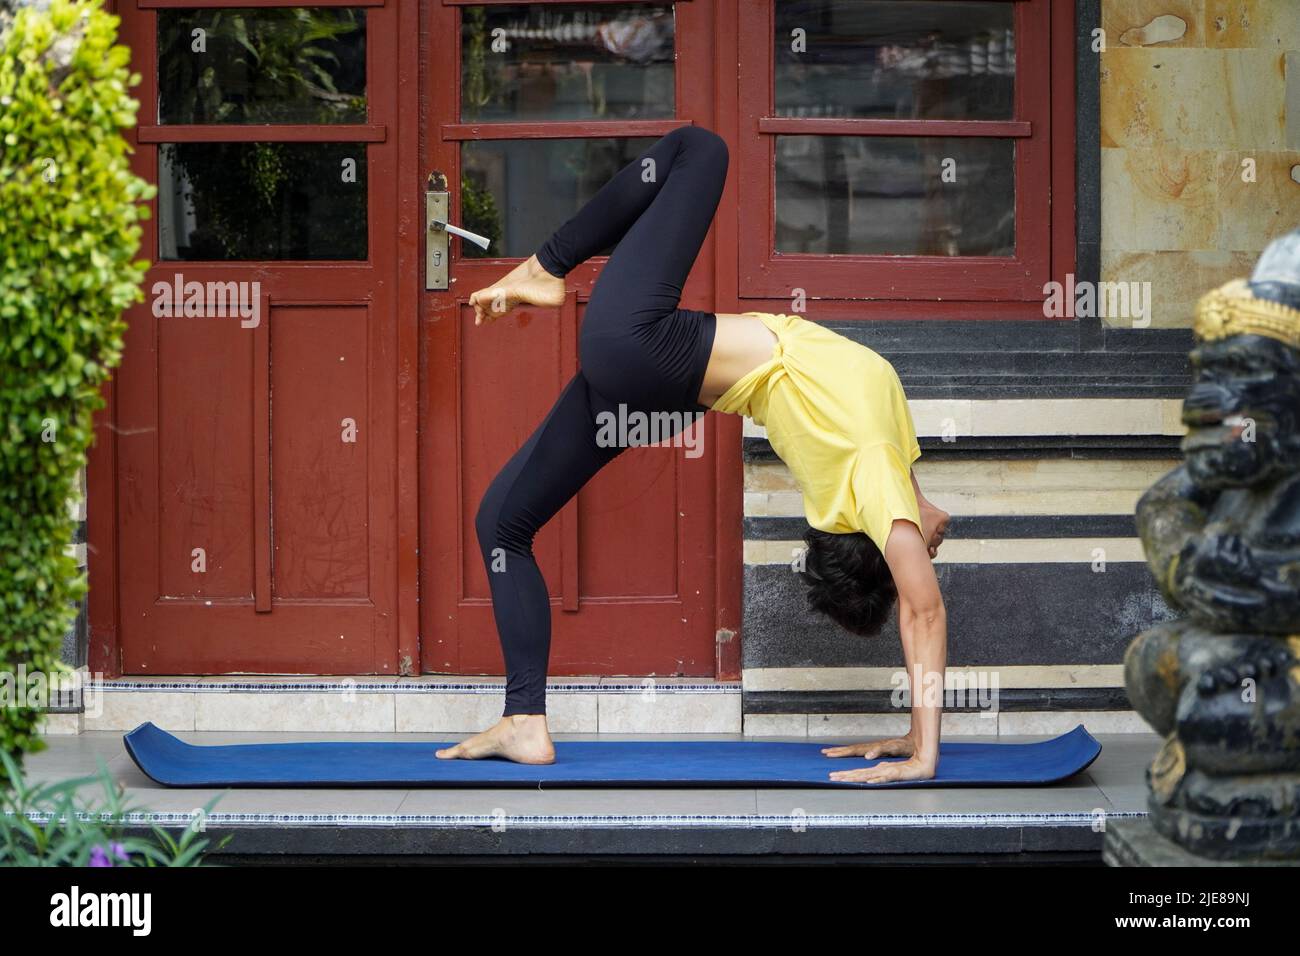 On his terrace, a young Asian girl with a stunning appearance is practicing Yoga while sporting a short haircut, a yellow shirt, and black leggings. S Stock Photo